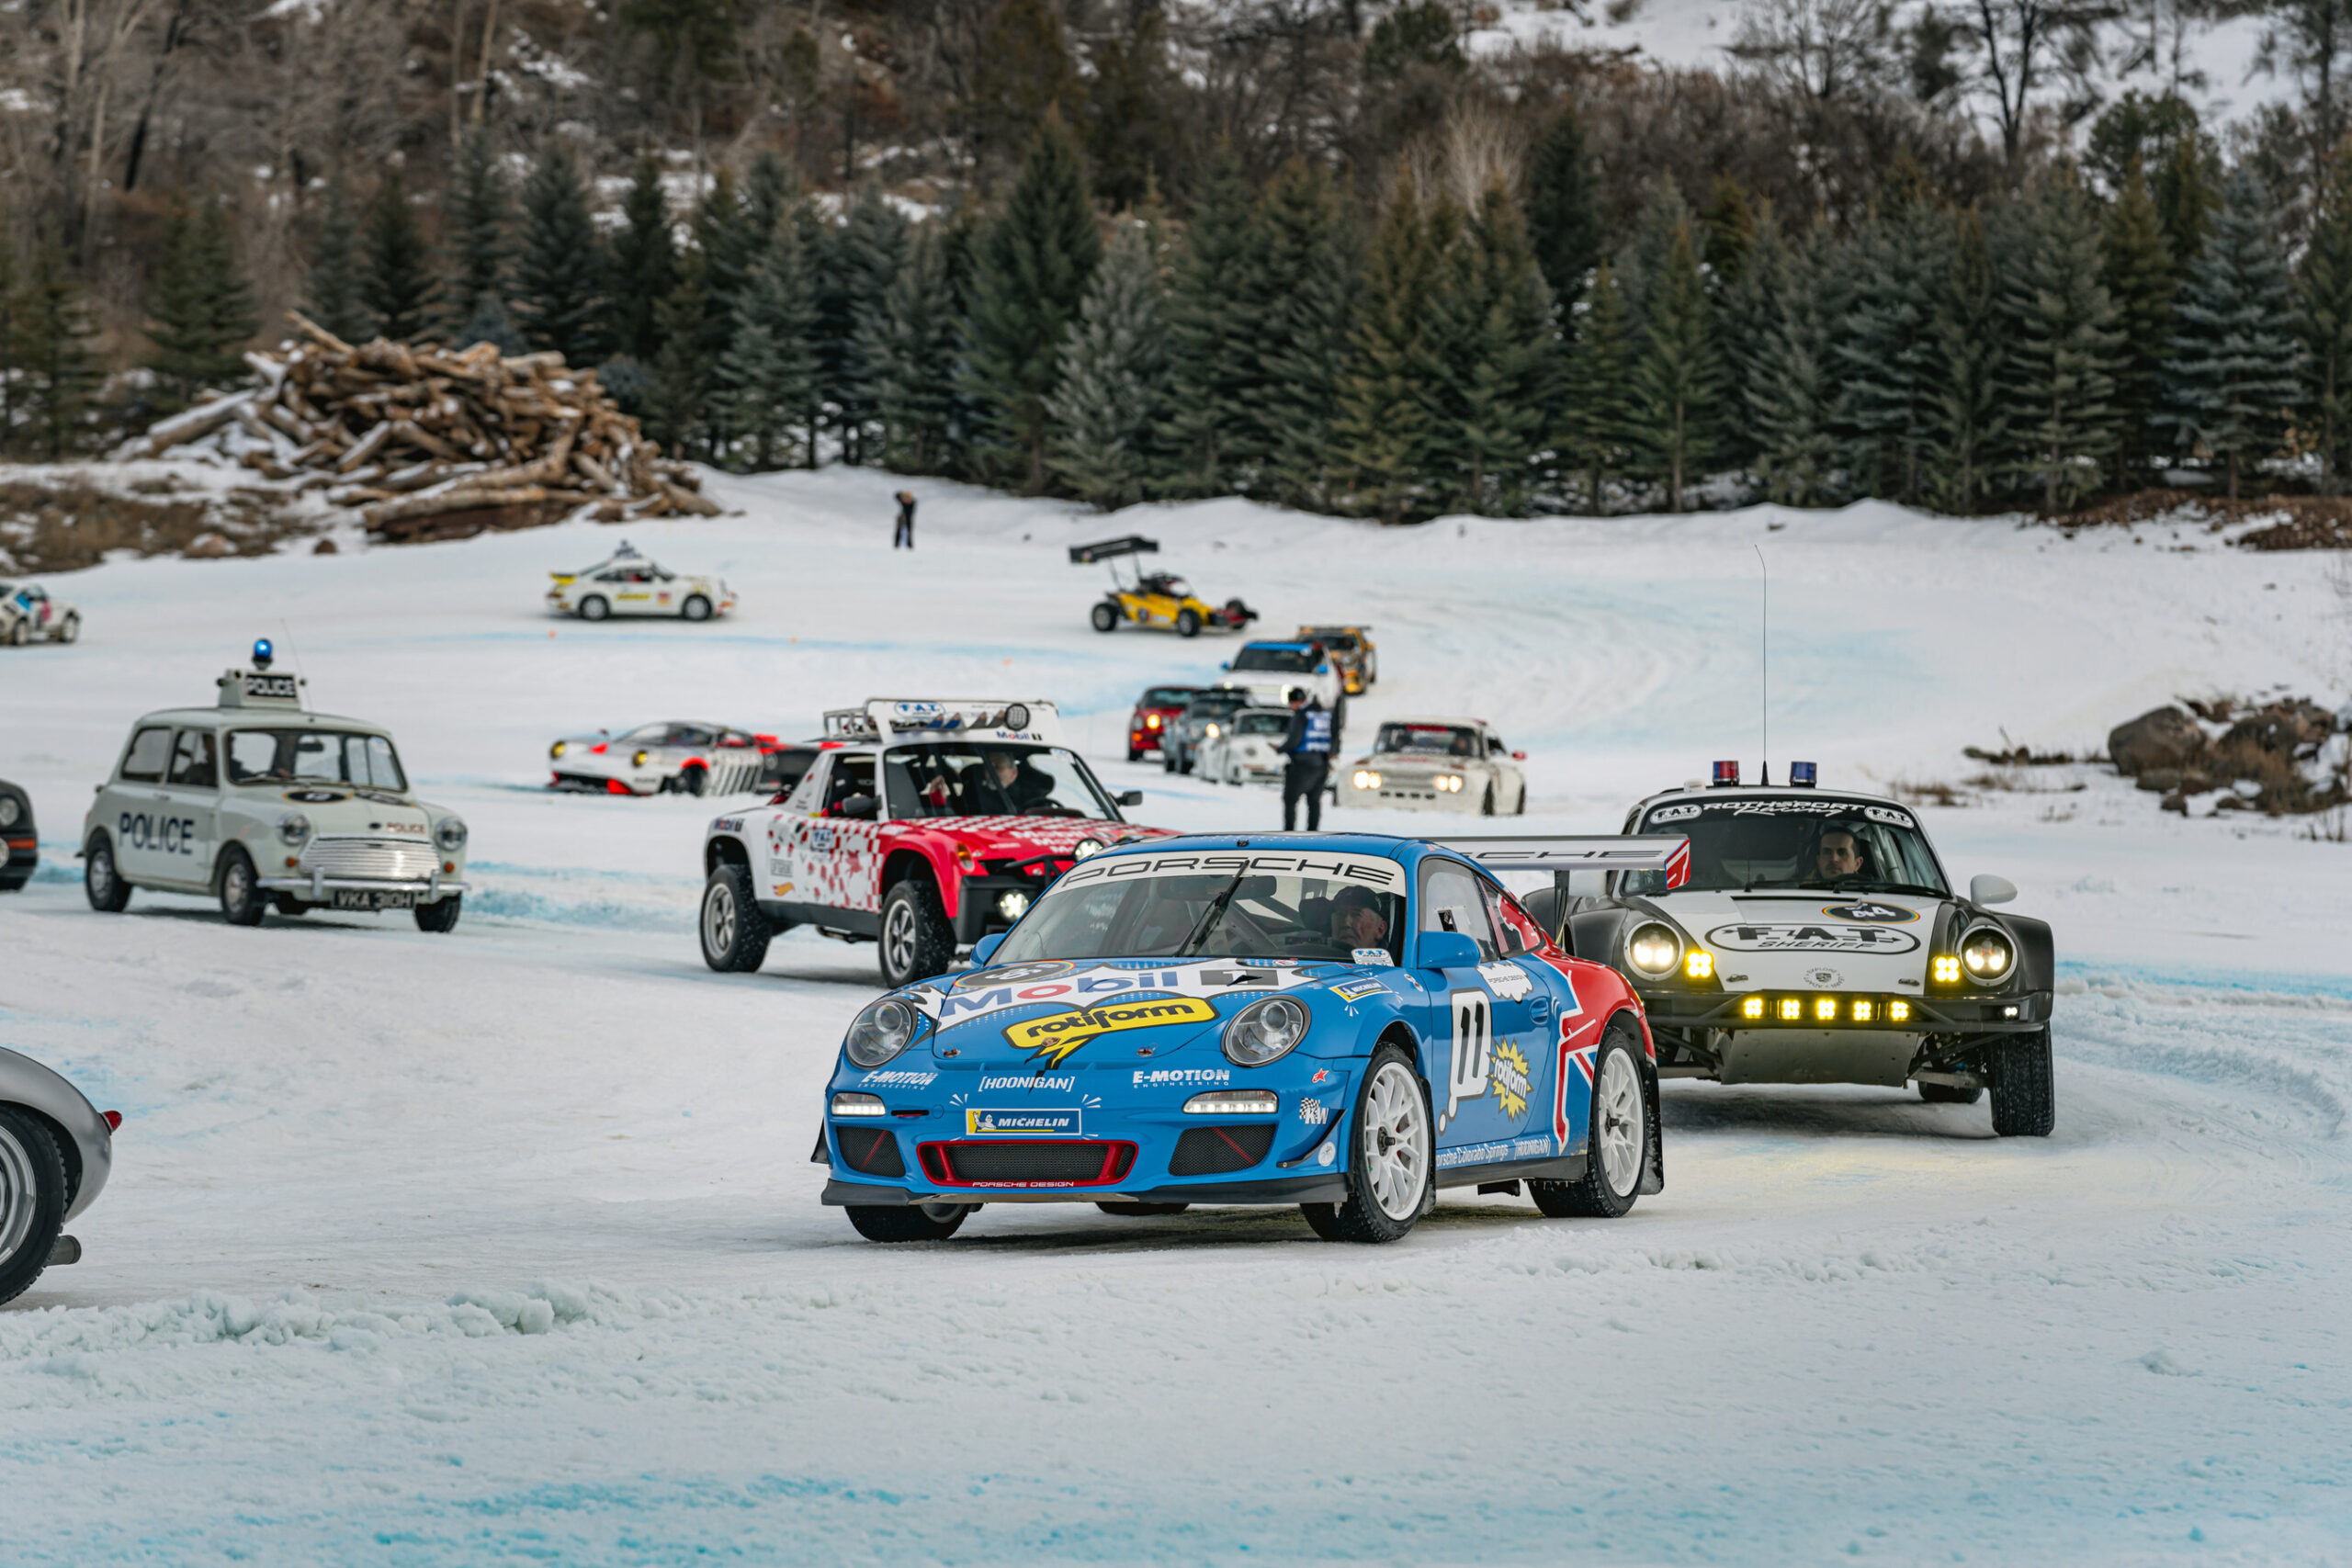 F.A.T. Ice Race Wraps Up in Aspen | THE SHOP